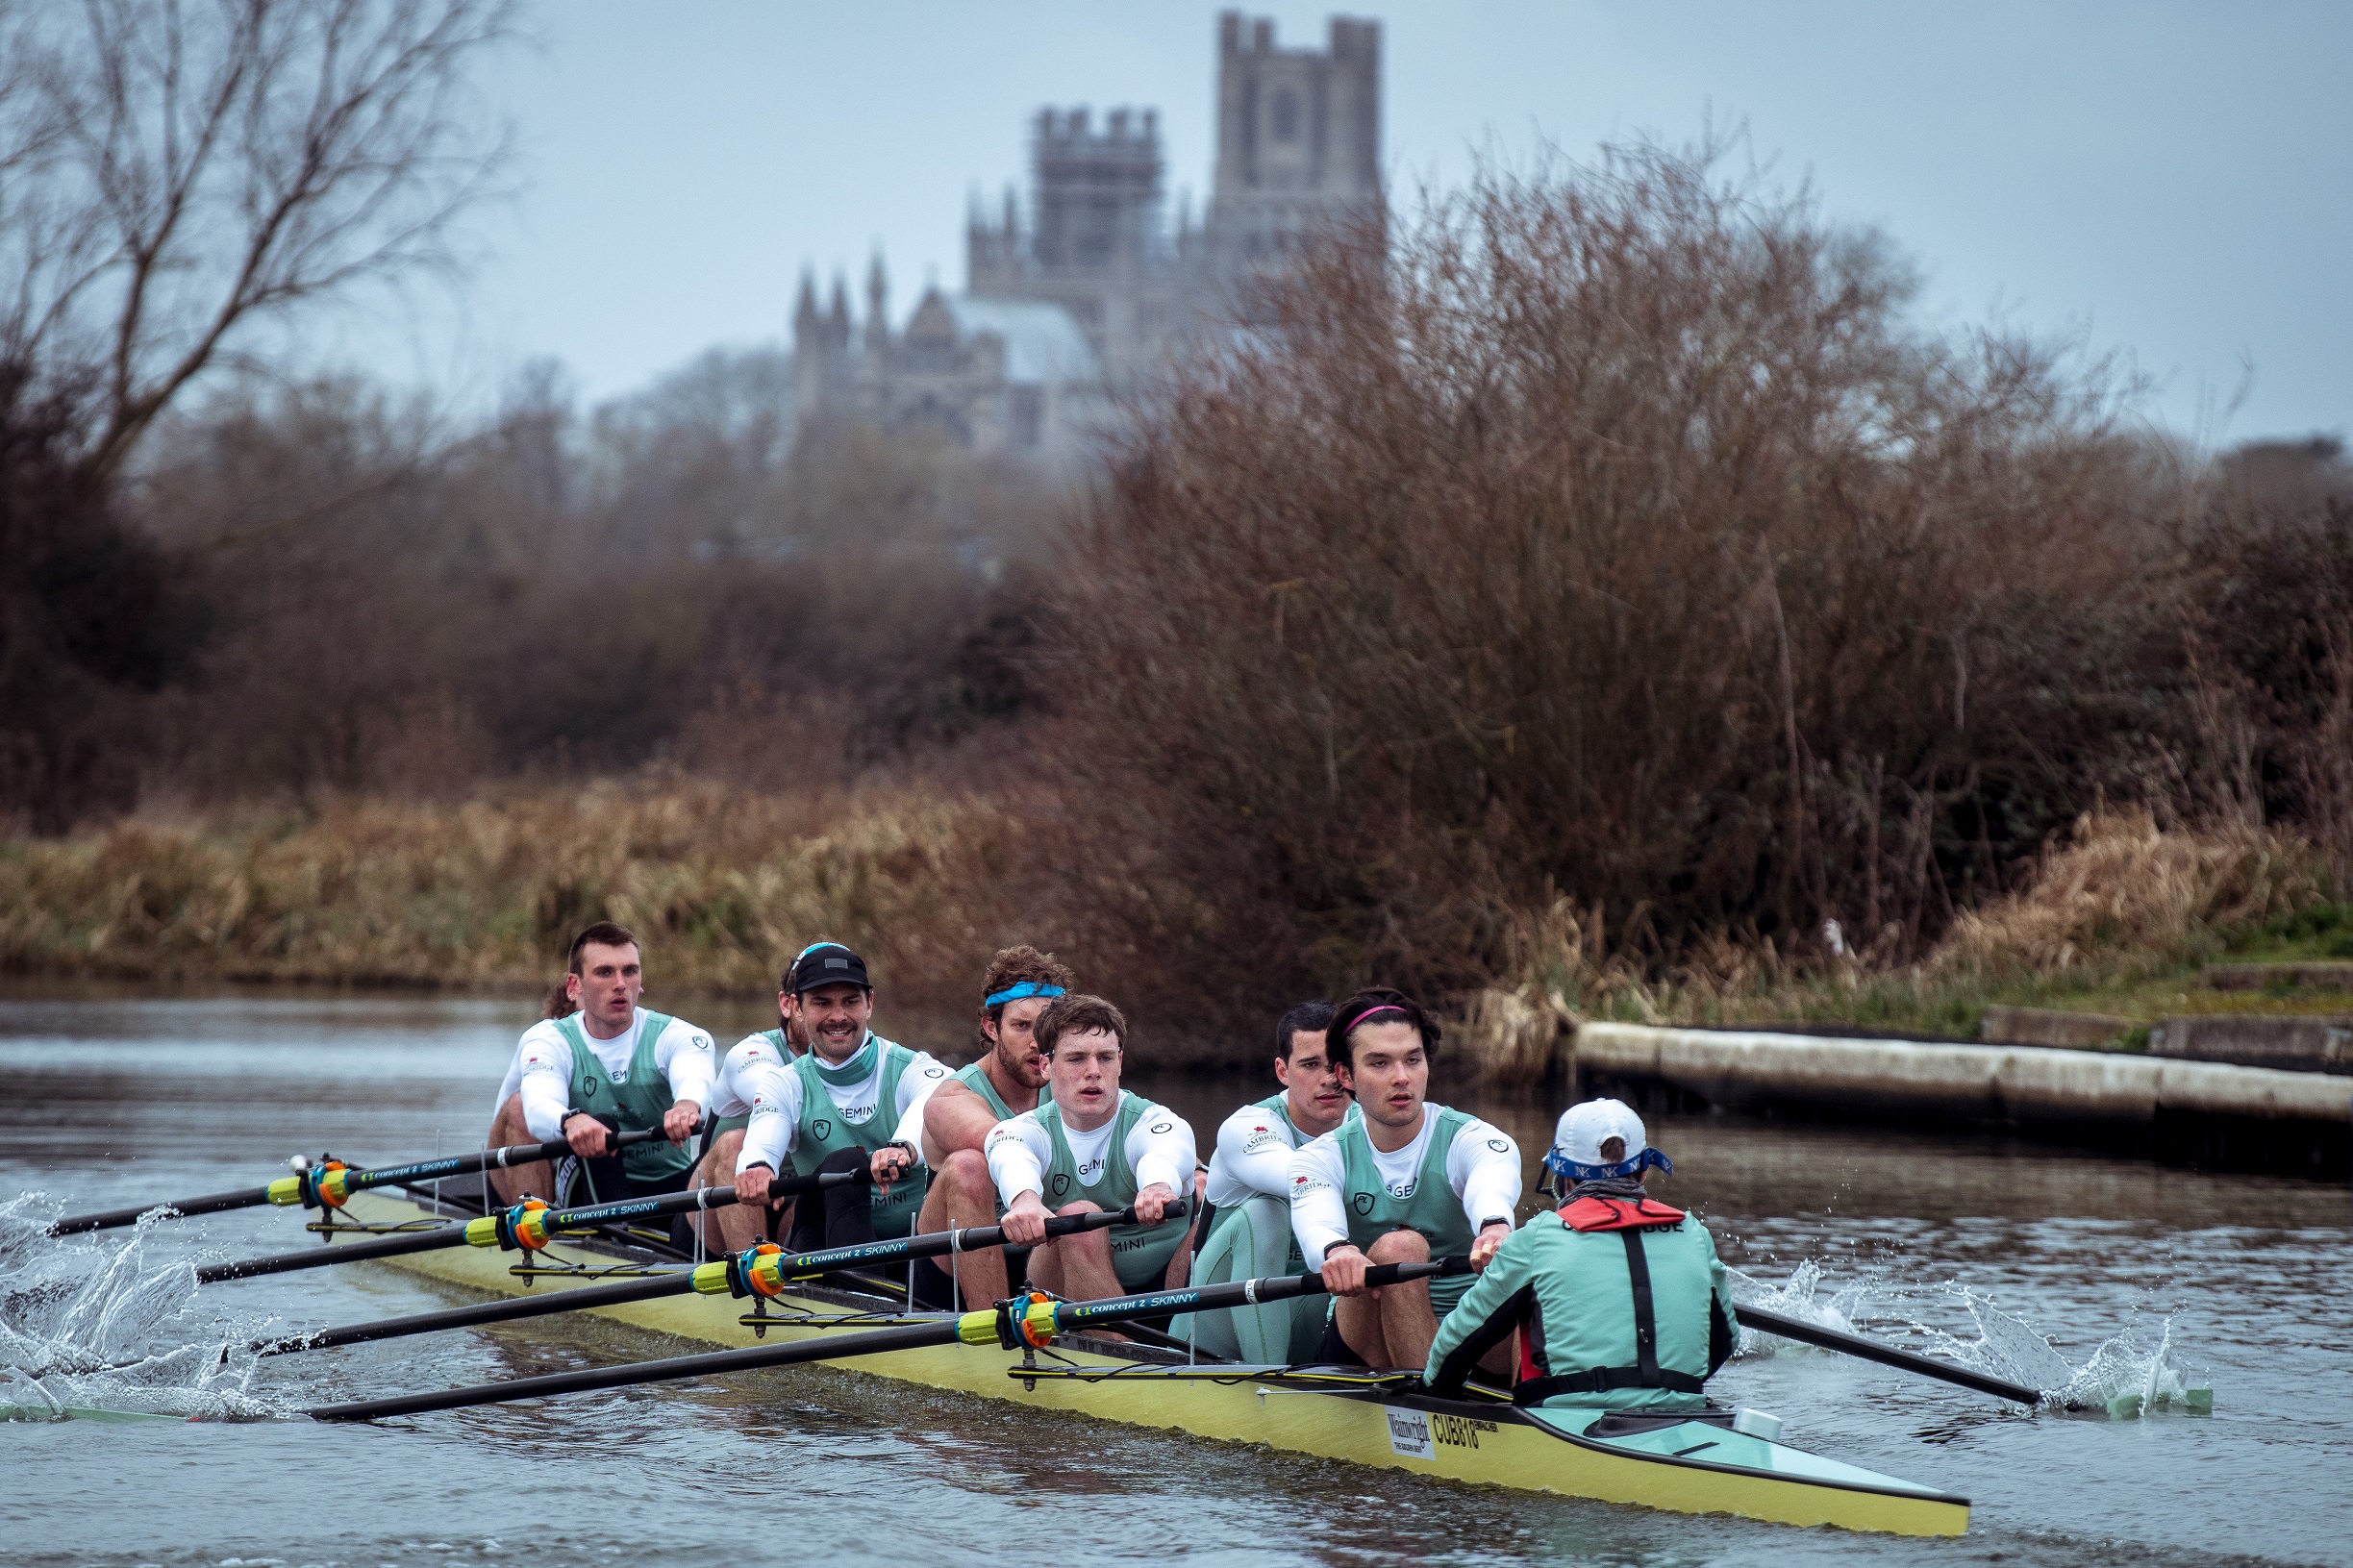 Ben Dyer pictured left in the Cambridge Blue boat, with Ely Cathedral in the background